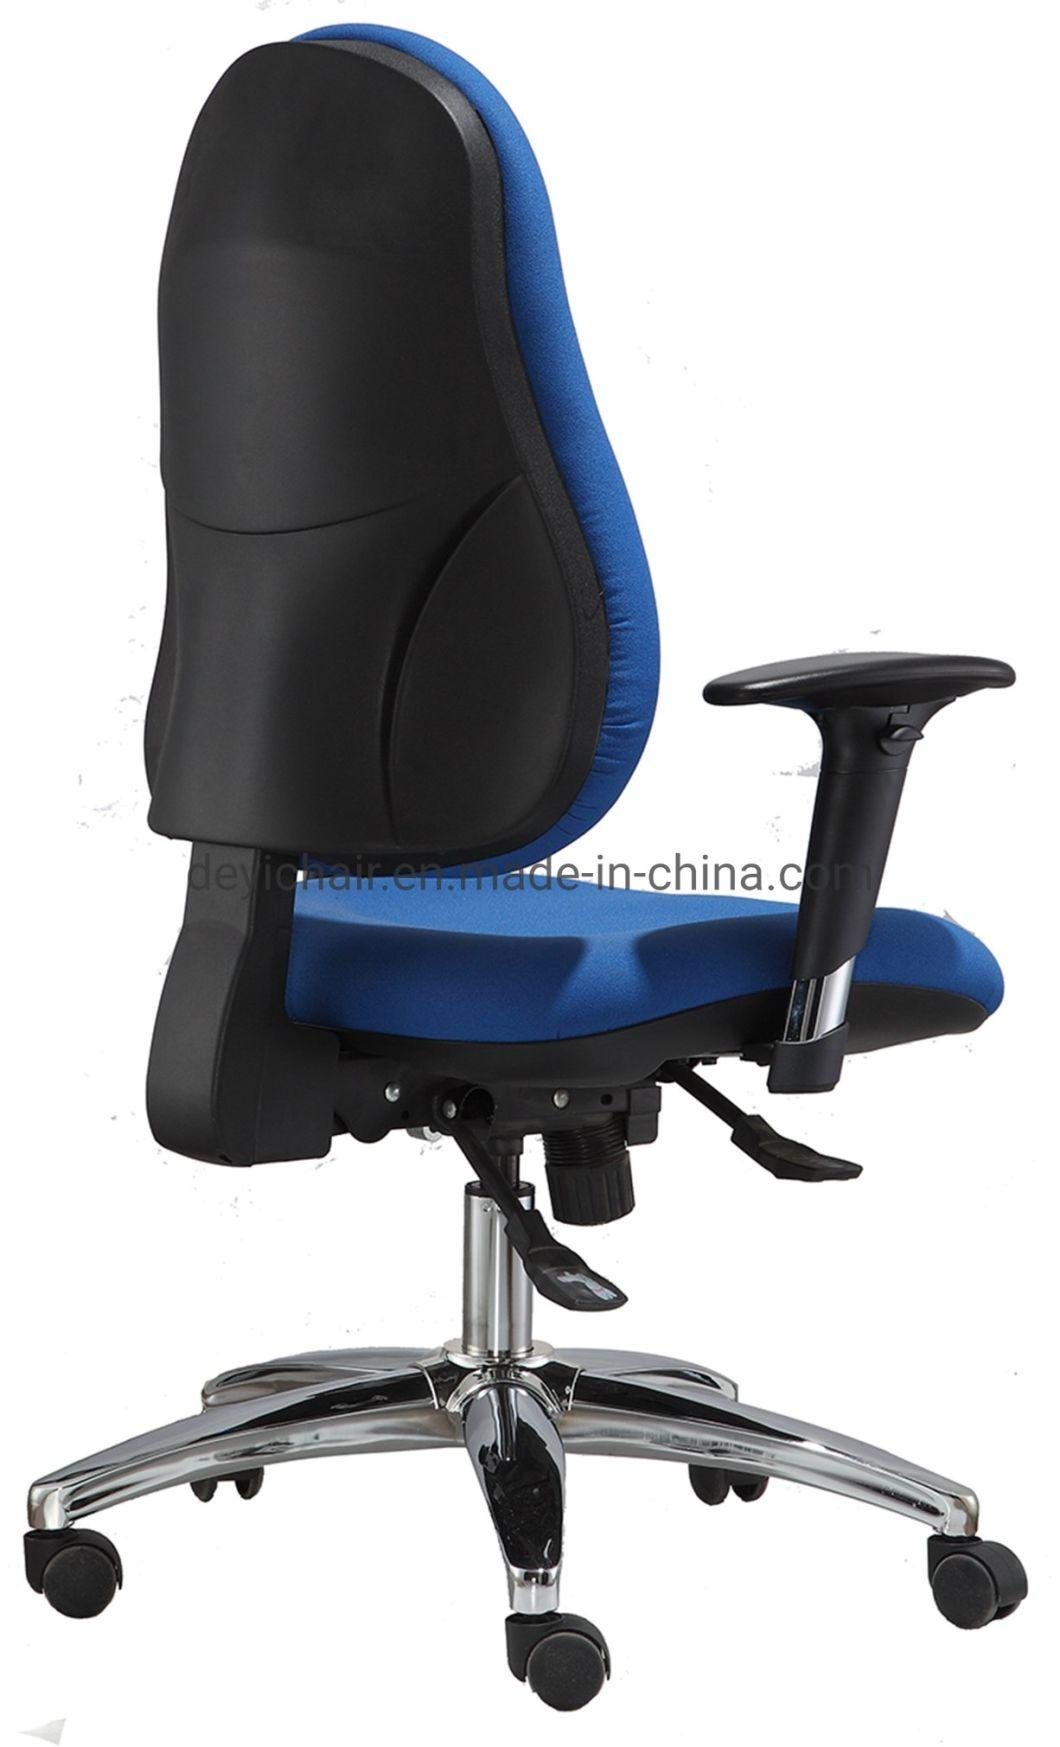 Ratchet Back Two Lever Functional Mechanism Nylon Caster Fabric Back&Seat Executive Computer Office Chair